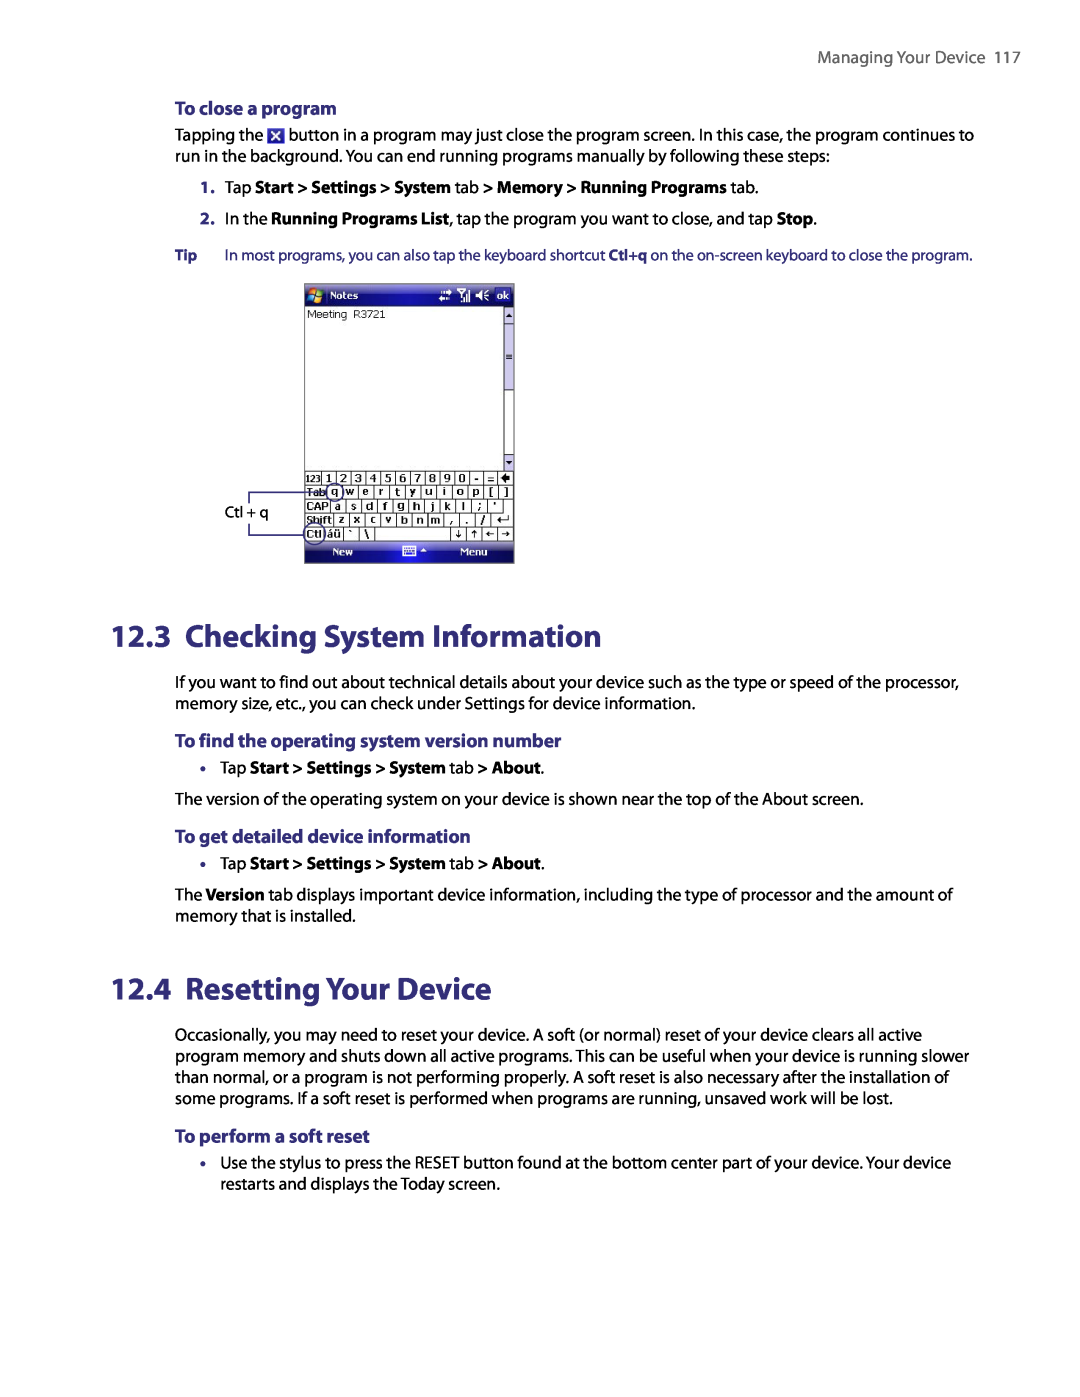 HTC PDA Phone Checking System Information, Resetting Your Device, To close a program, To get detailed device information 